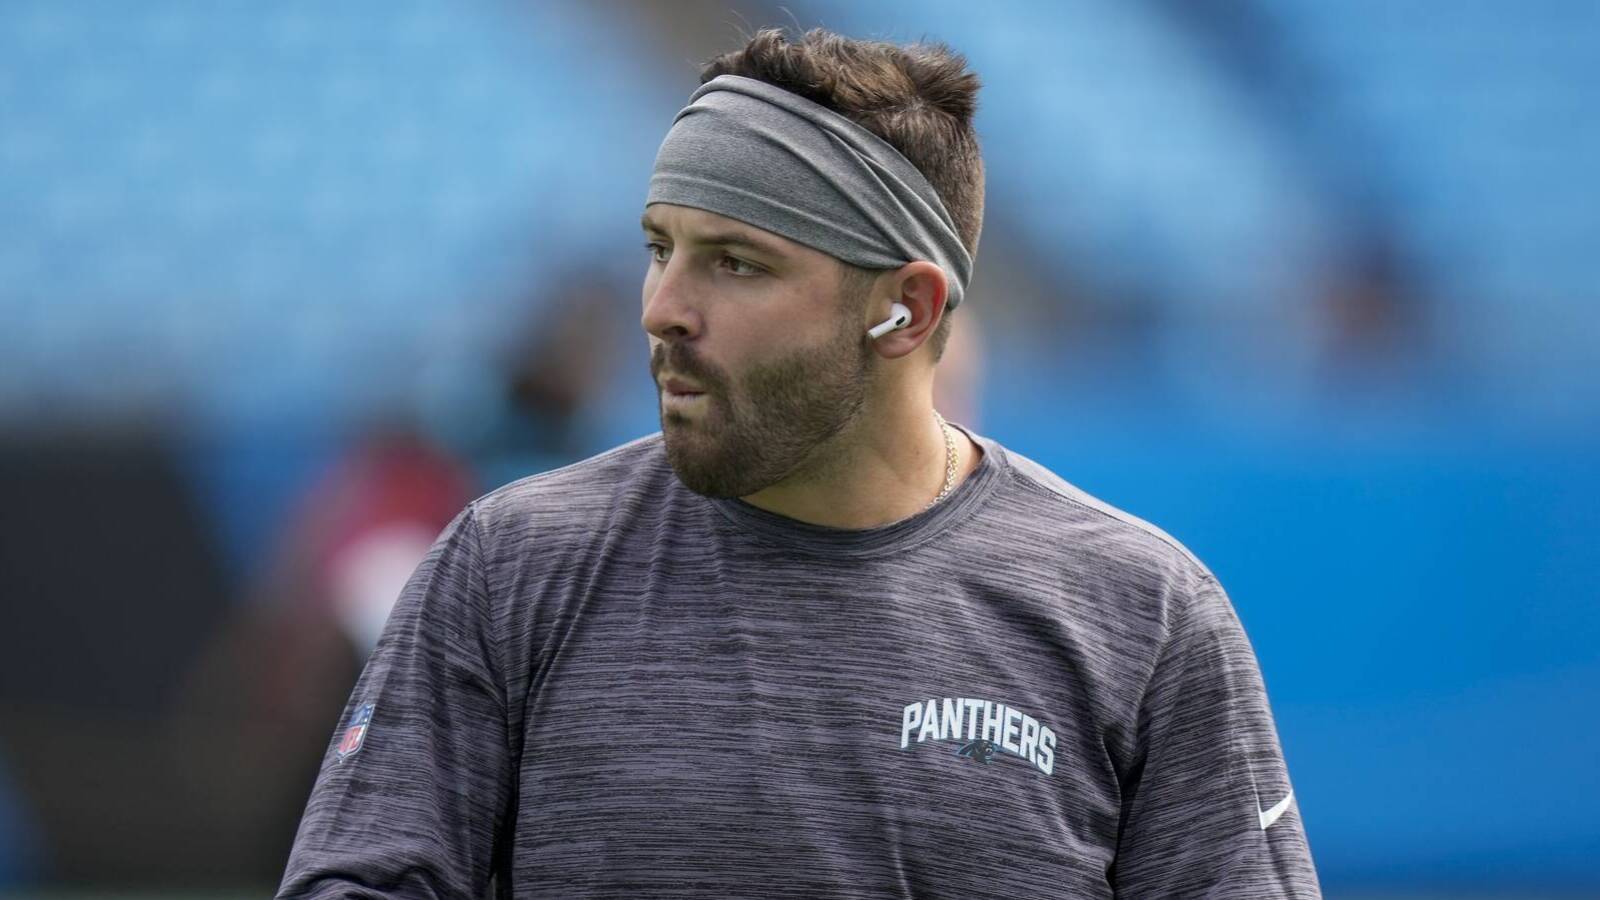 Insider explains why Panthers might keep Baker Mayfield benched